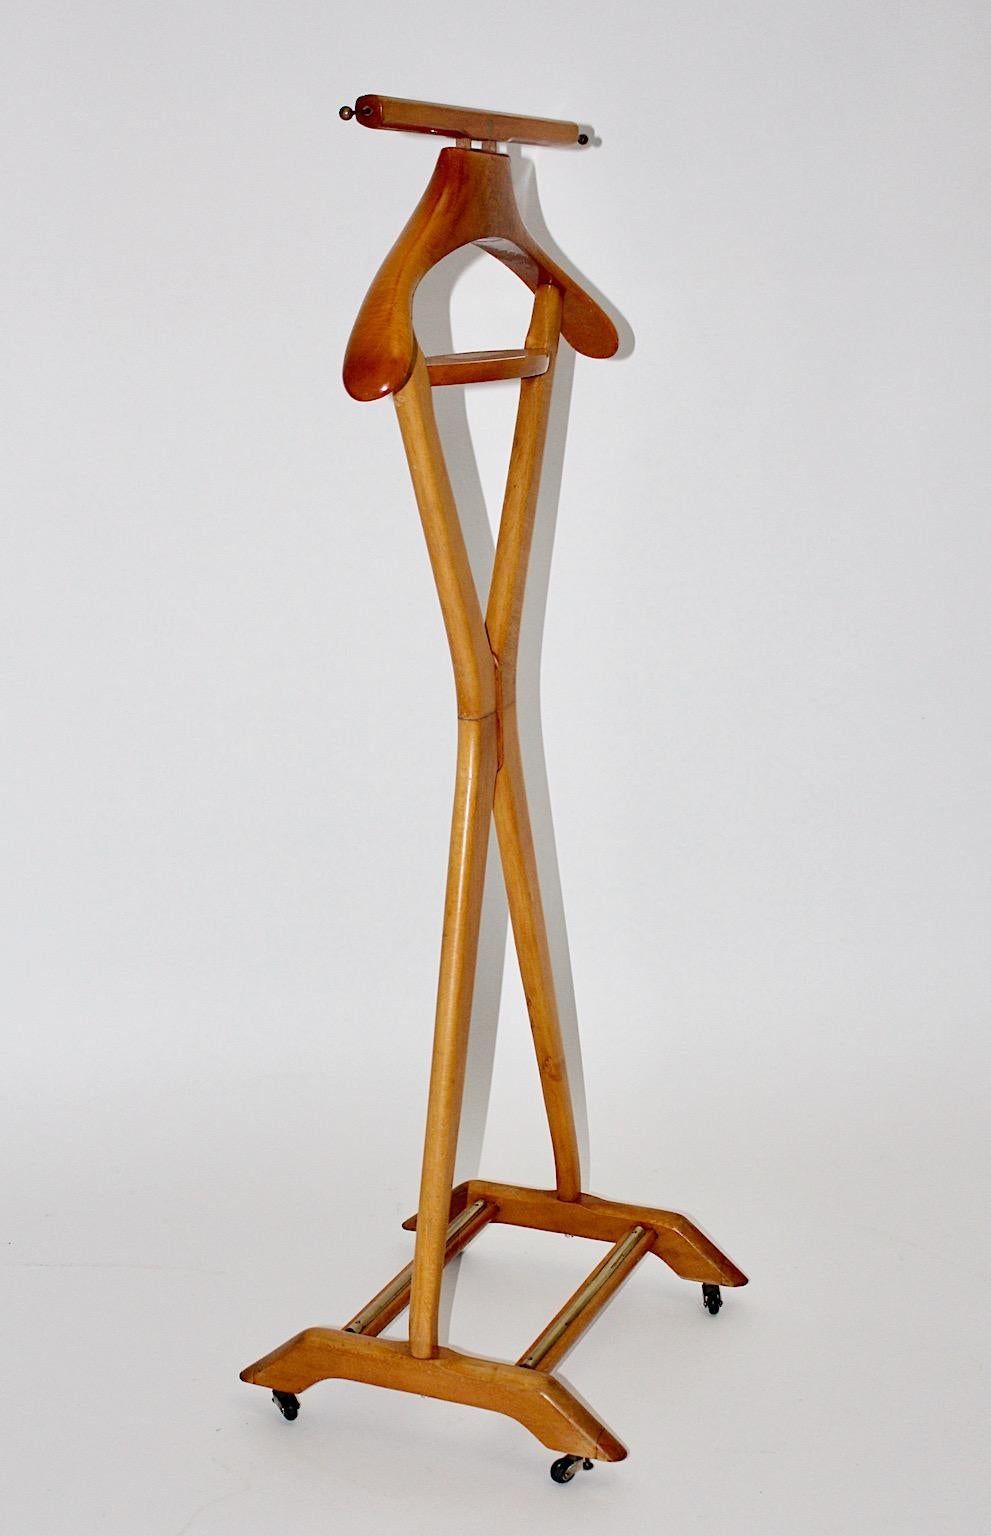 Mid-Century Modern vintage x form valet or coat stand style of Ico & Luisa Parisi for Reguitti 1950s.
A gorgeous design valet in a honey color tone with brass details.
Marked with company name 
The beautiful design style to mix up organic and